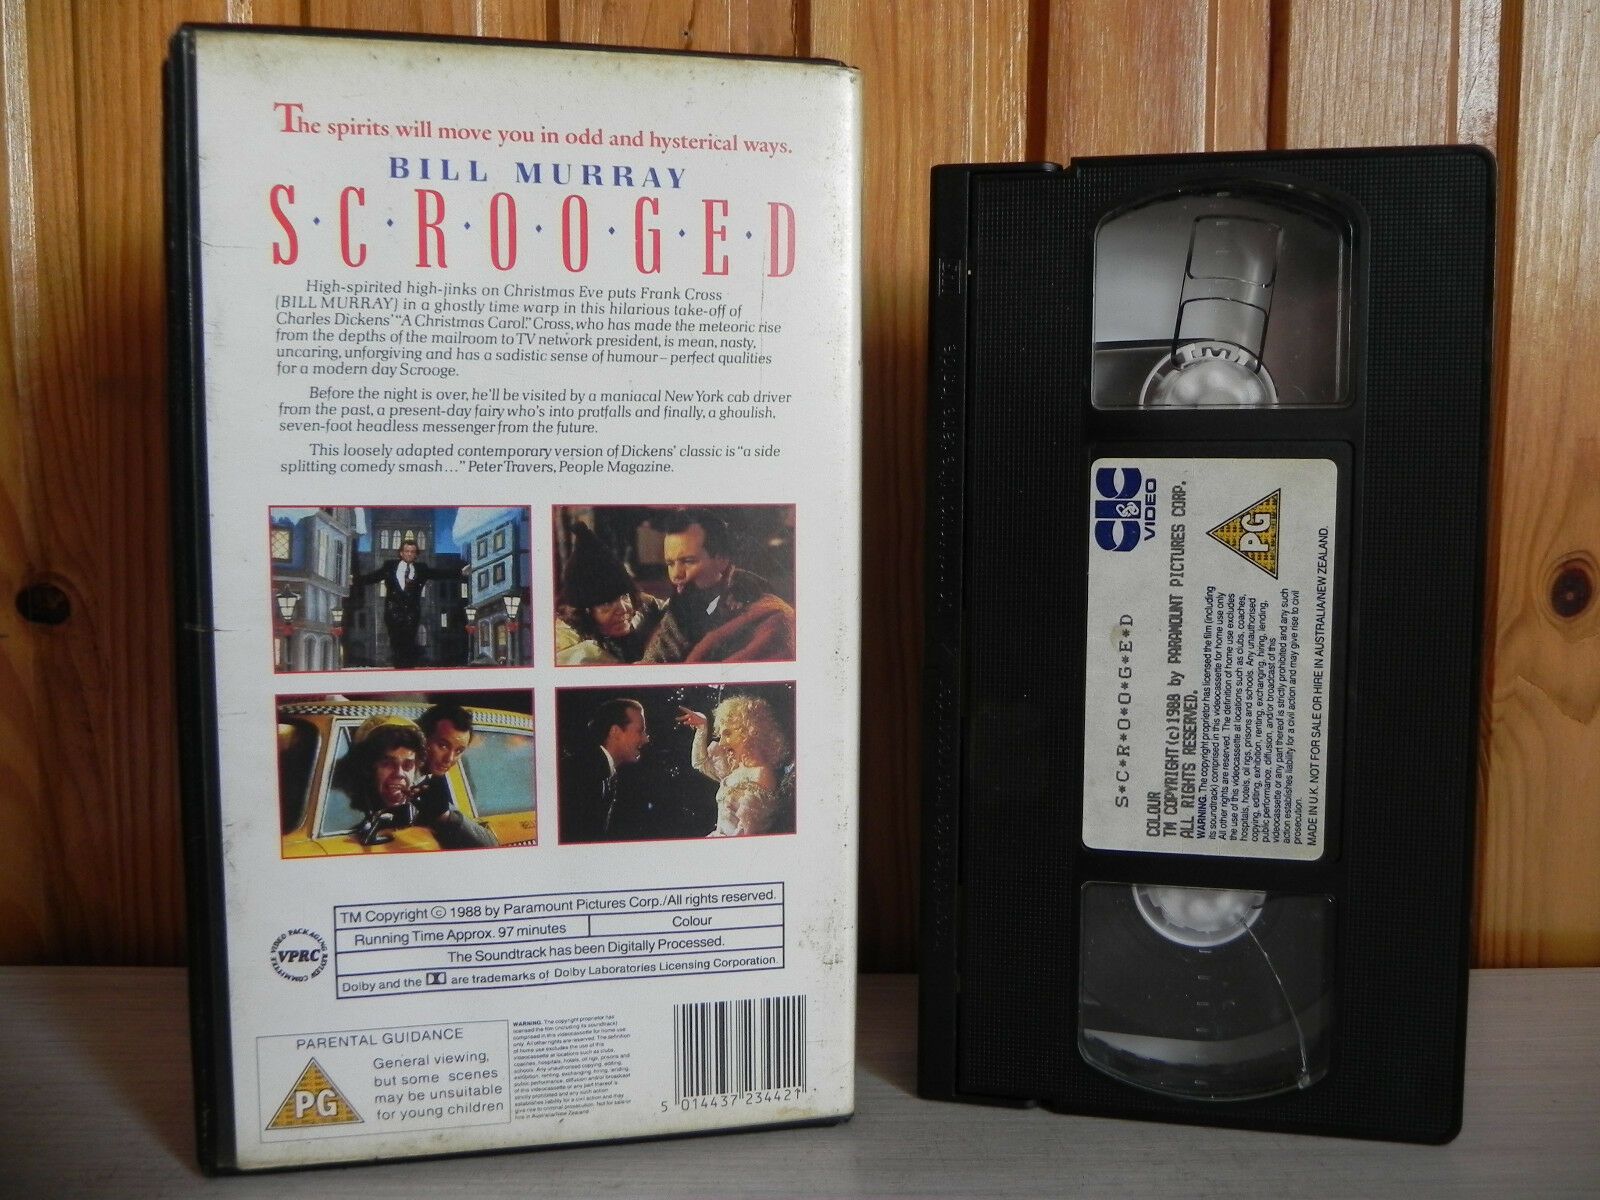 Scrooged - CIC Video - Comedy - Modern Day Dicken's Classic - Pal VHS-